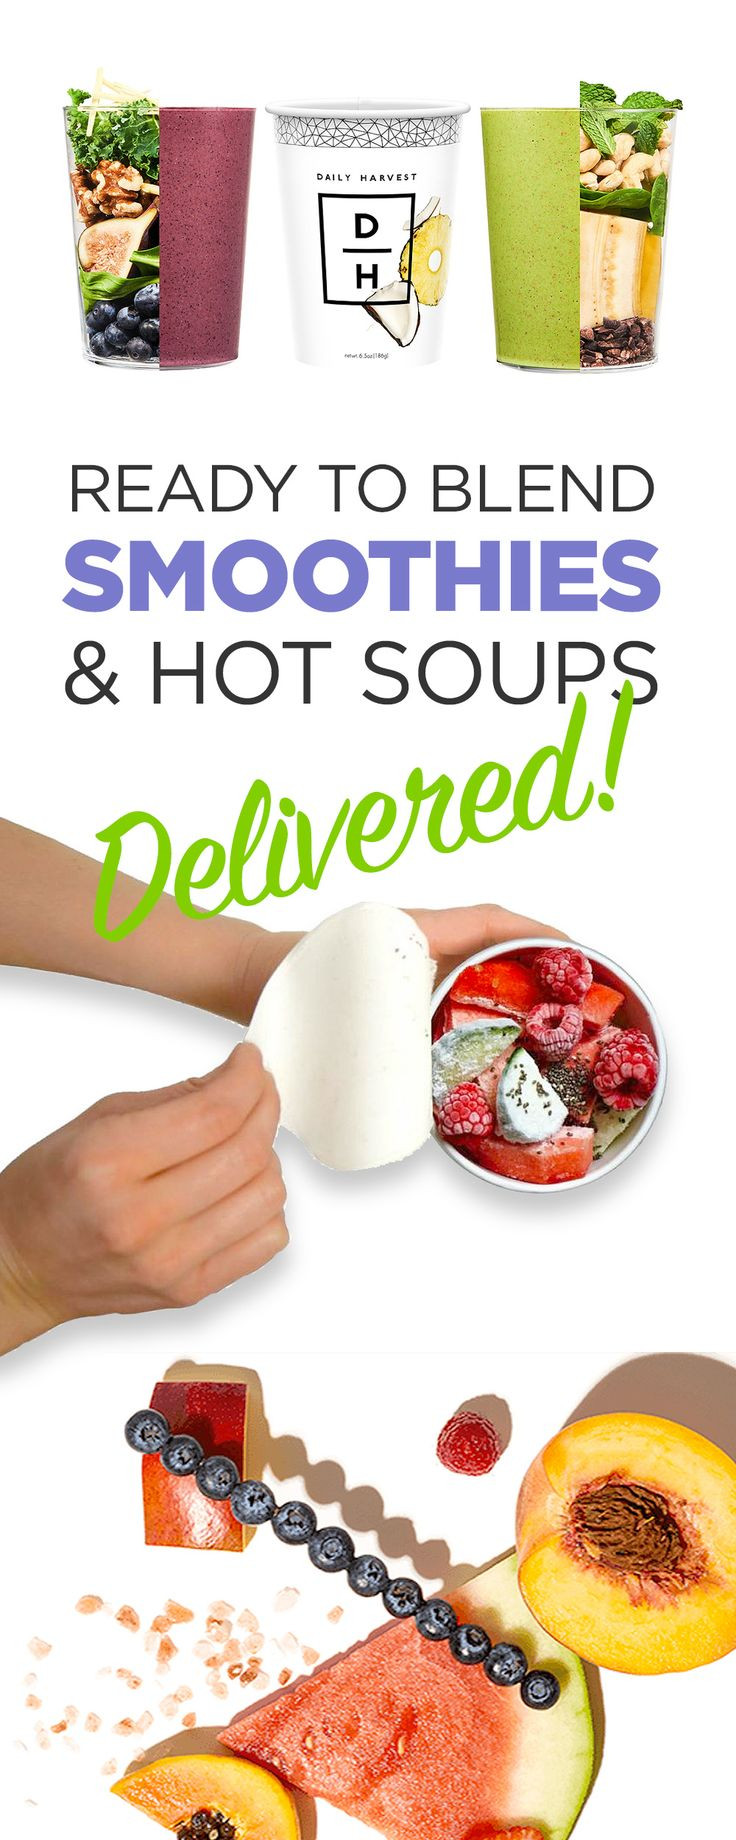 Smoothies Delivered To Your Door
 Fitness Motivation Get whole food smoothies & soups